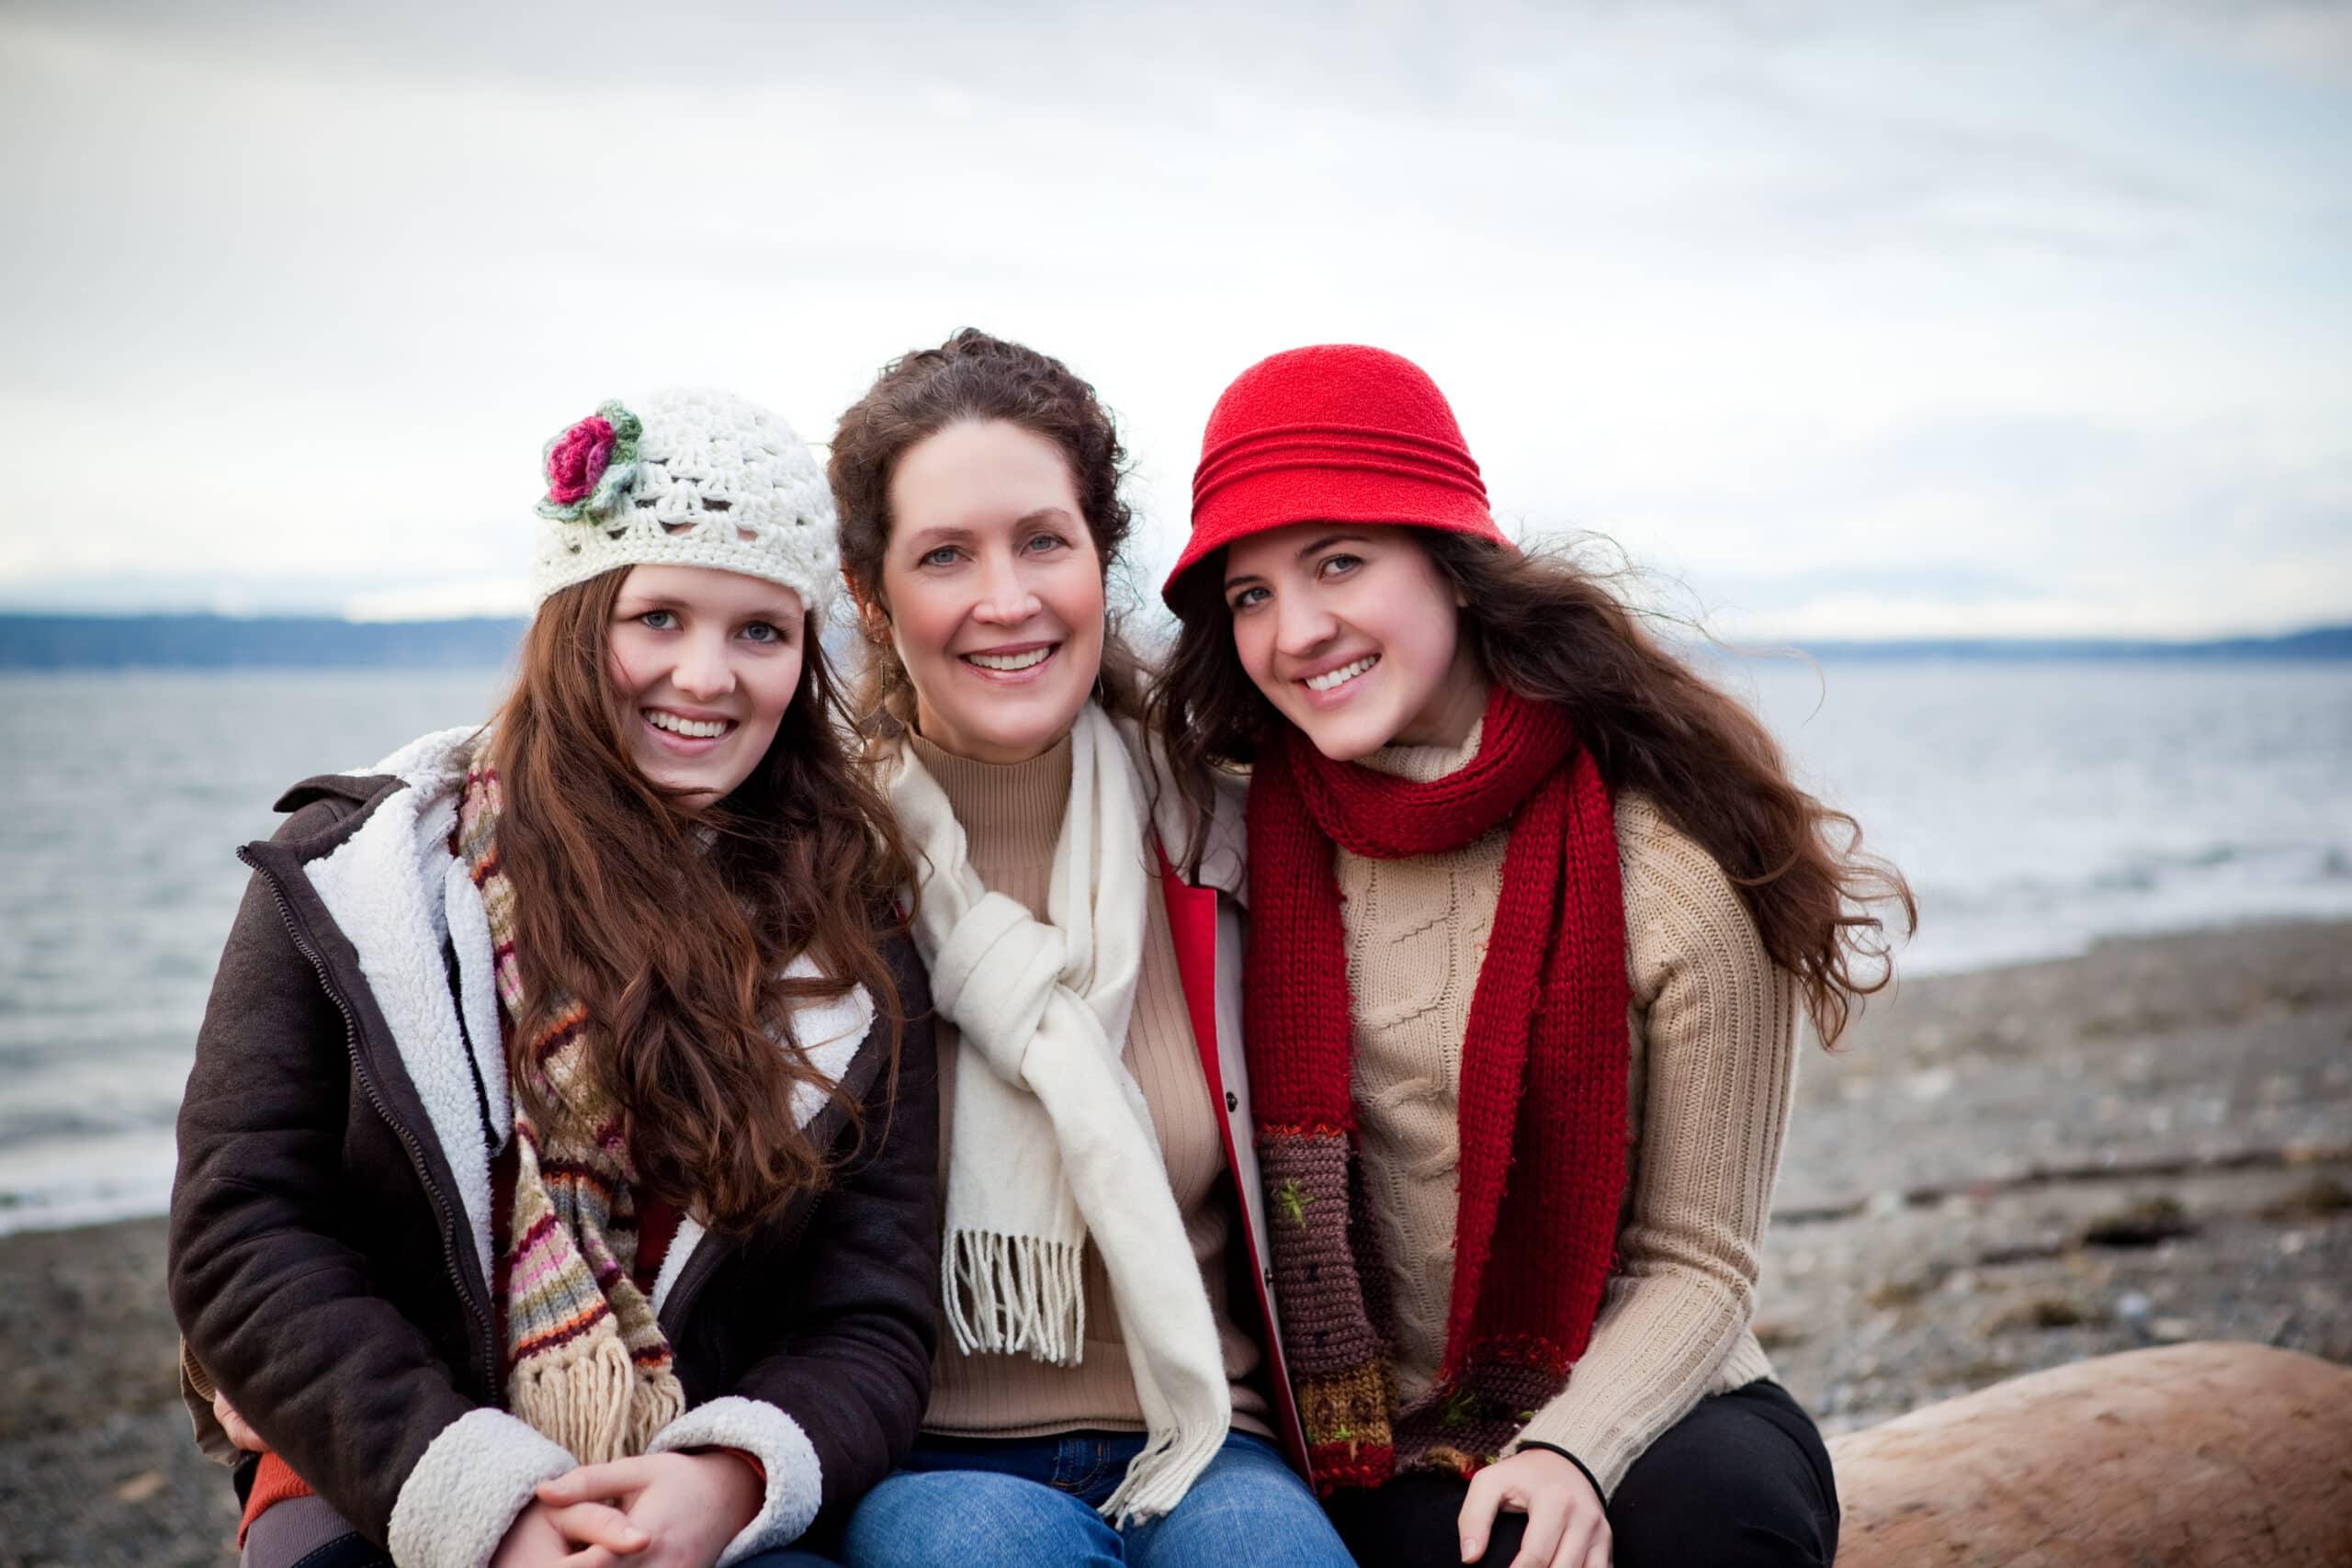 A portrait of a mother and her daughters on the beach